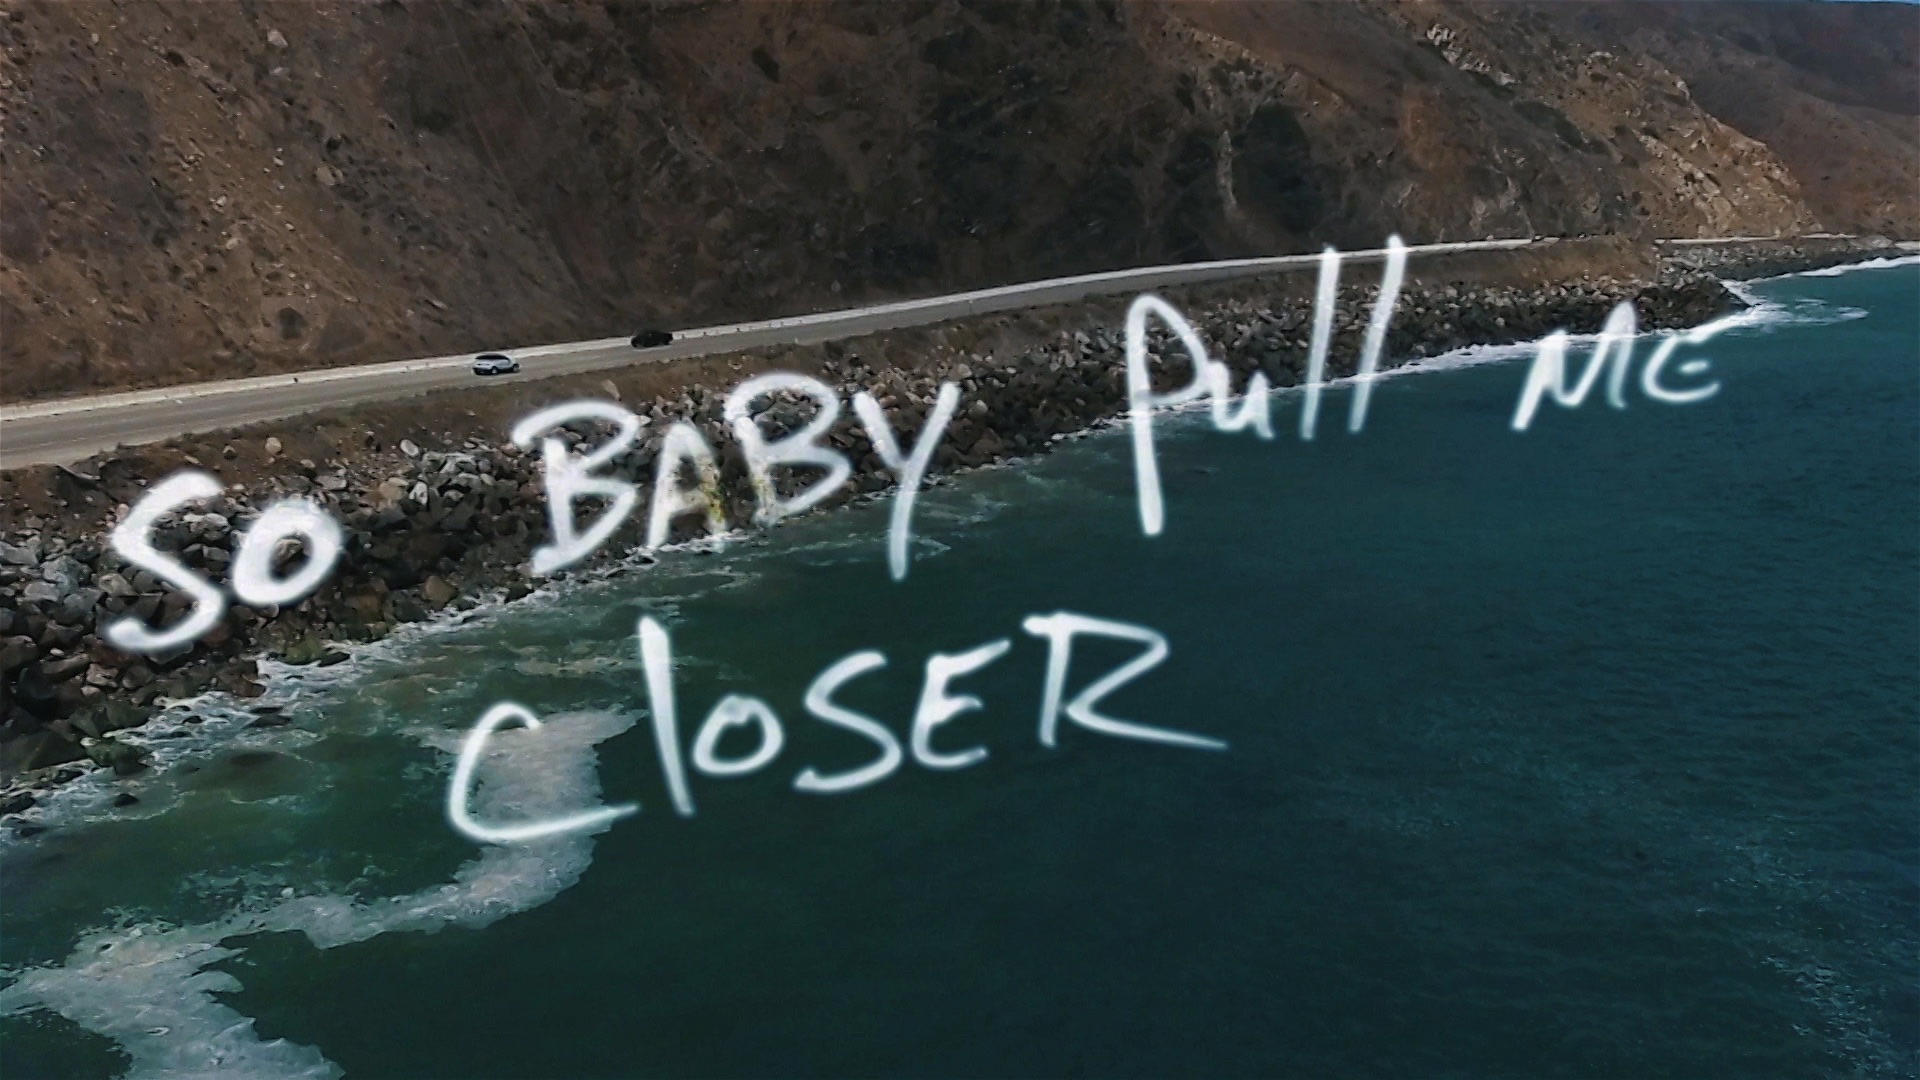 Close are песня. Closer the Chainsmokers. The Chainsmokers - closer (Lyric) ft. Halsey. The Chainsmokers closer Lyrics. The Chainsmokers closer Video ft Halsey.